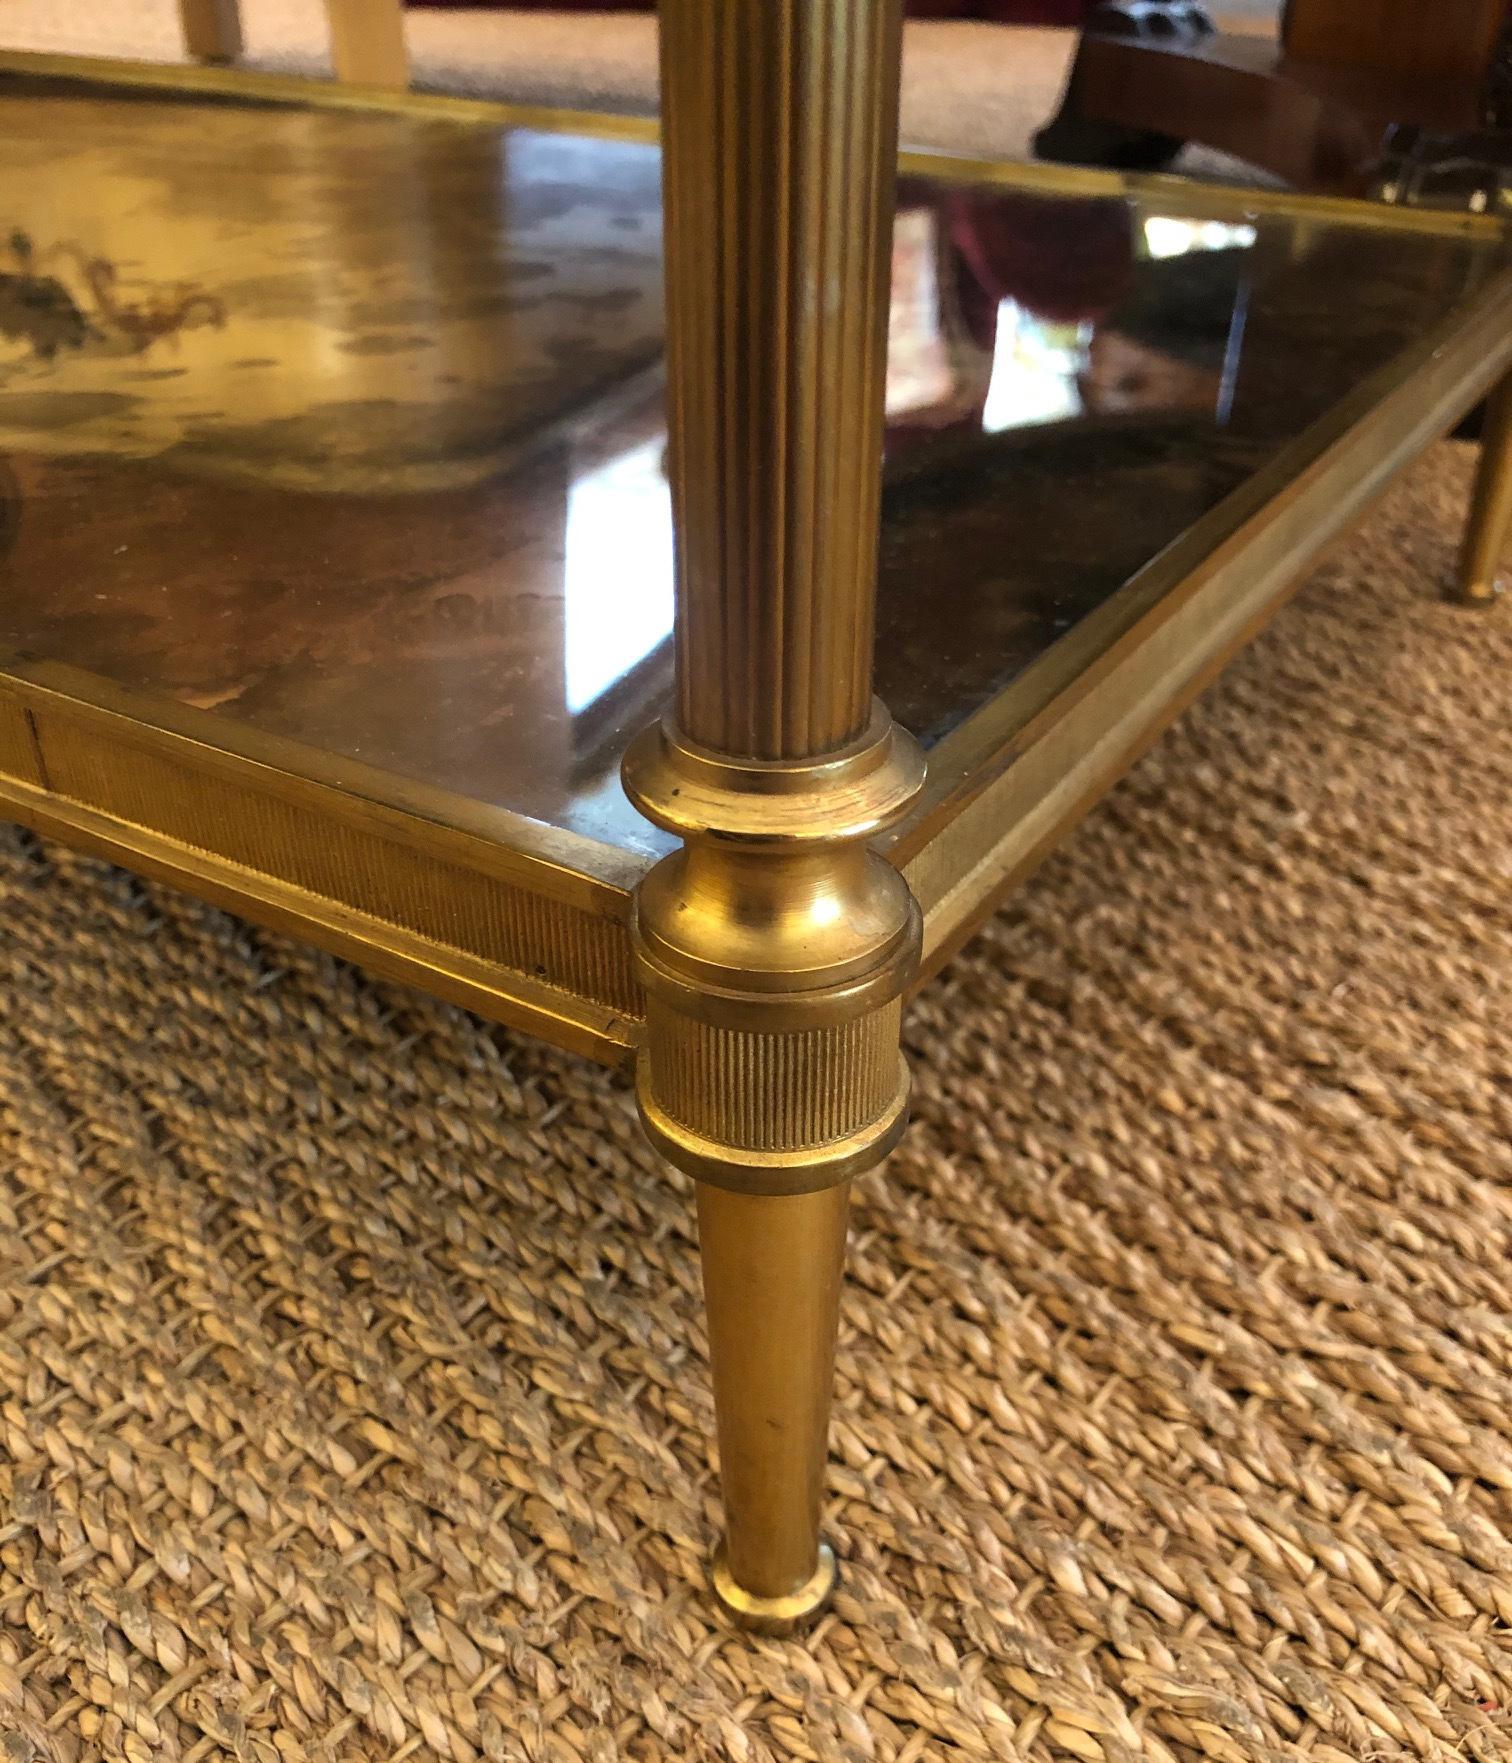 Of solid gilt-bronze in the timeless neoclassical style favored by Louis XVI of France and revitalized by Maison Jansen in the 20th century; the inset oxidized mirrored top with reeded apron and raised on reeded supports joining a similar lower